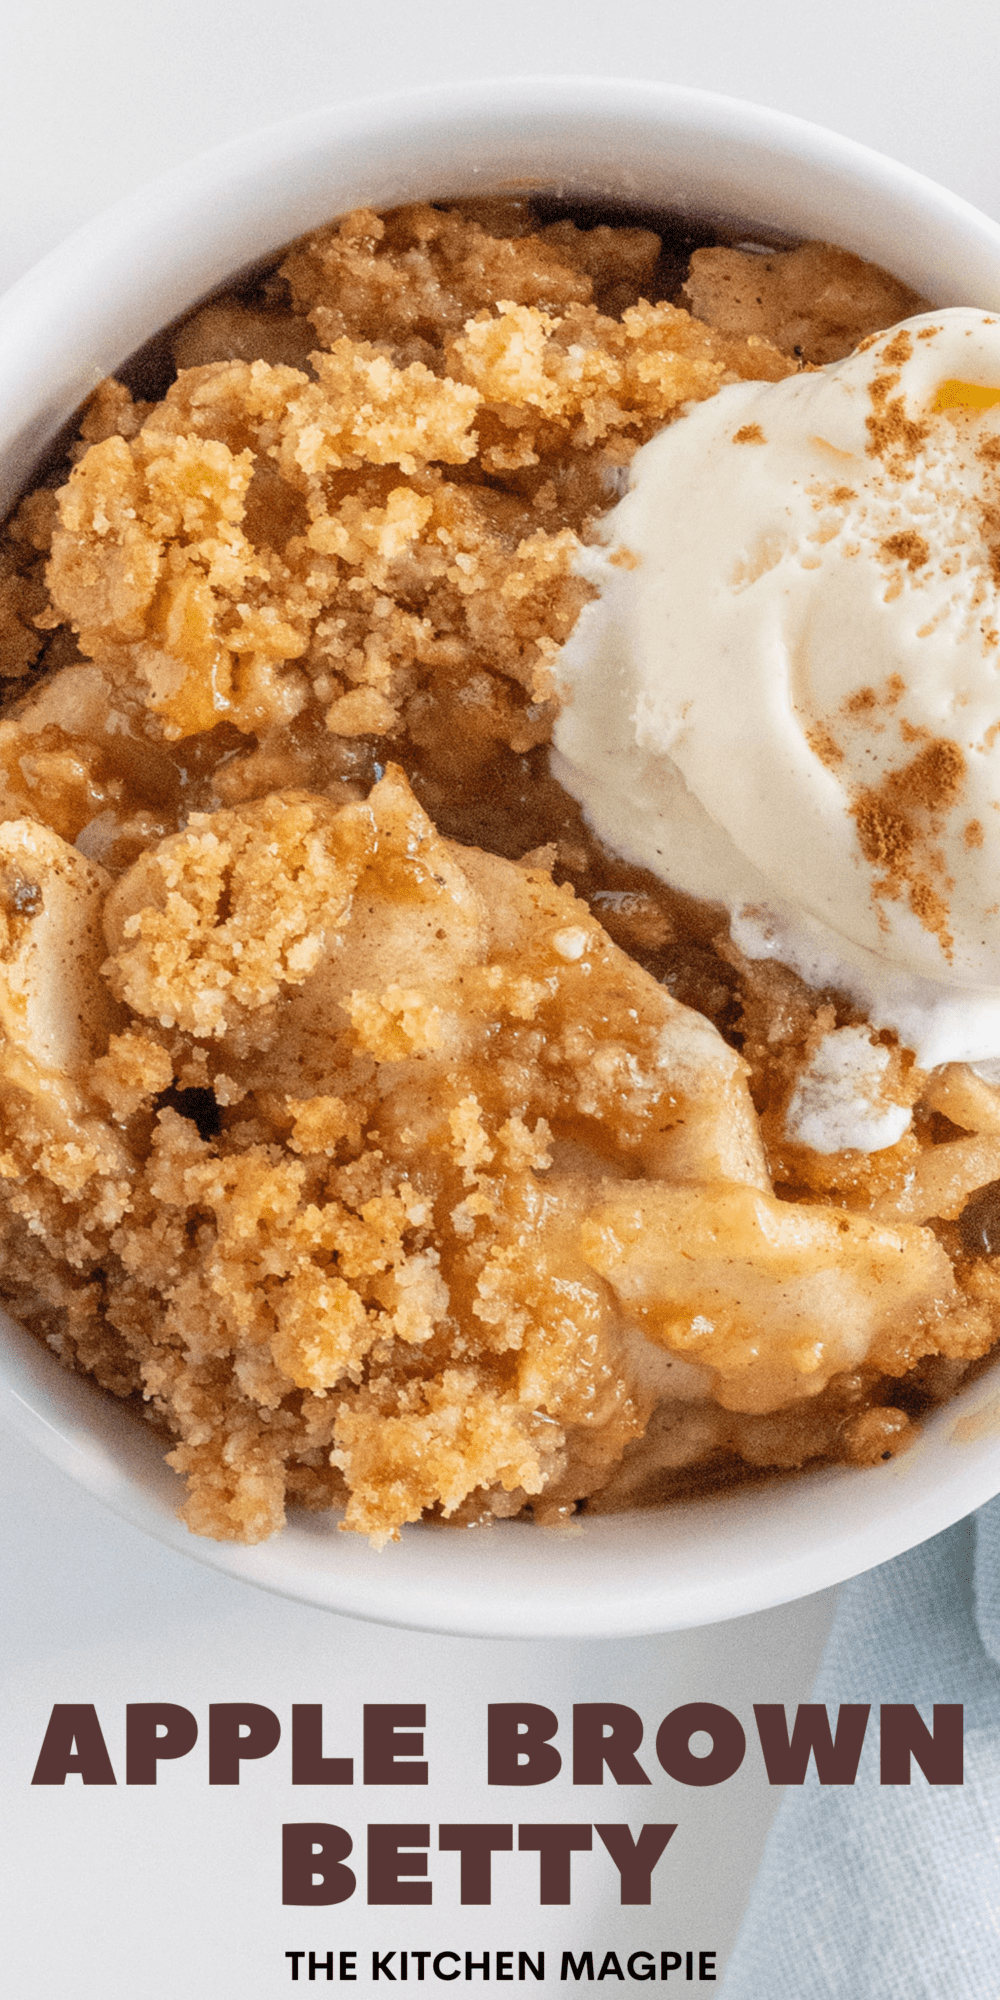 Apple Brown Betty is another easy, sweet option to use up your fall apples! Sweet, tangy, and extra crunchy, this is the perfect fall dessert to give you that cozy, autumnal feel on a cold night.